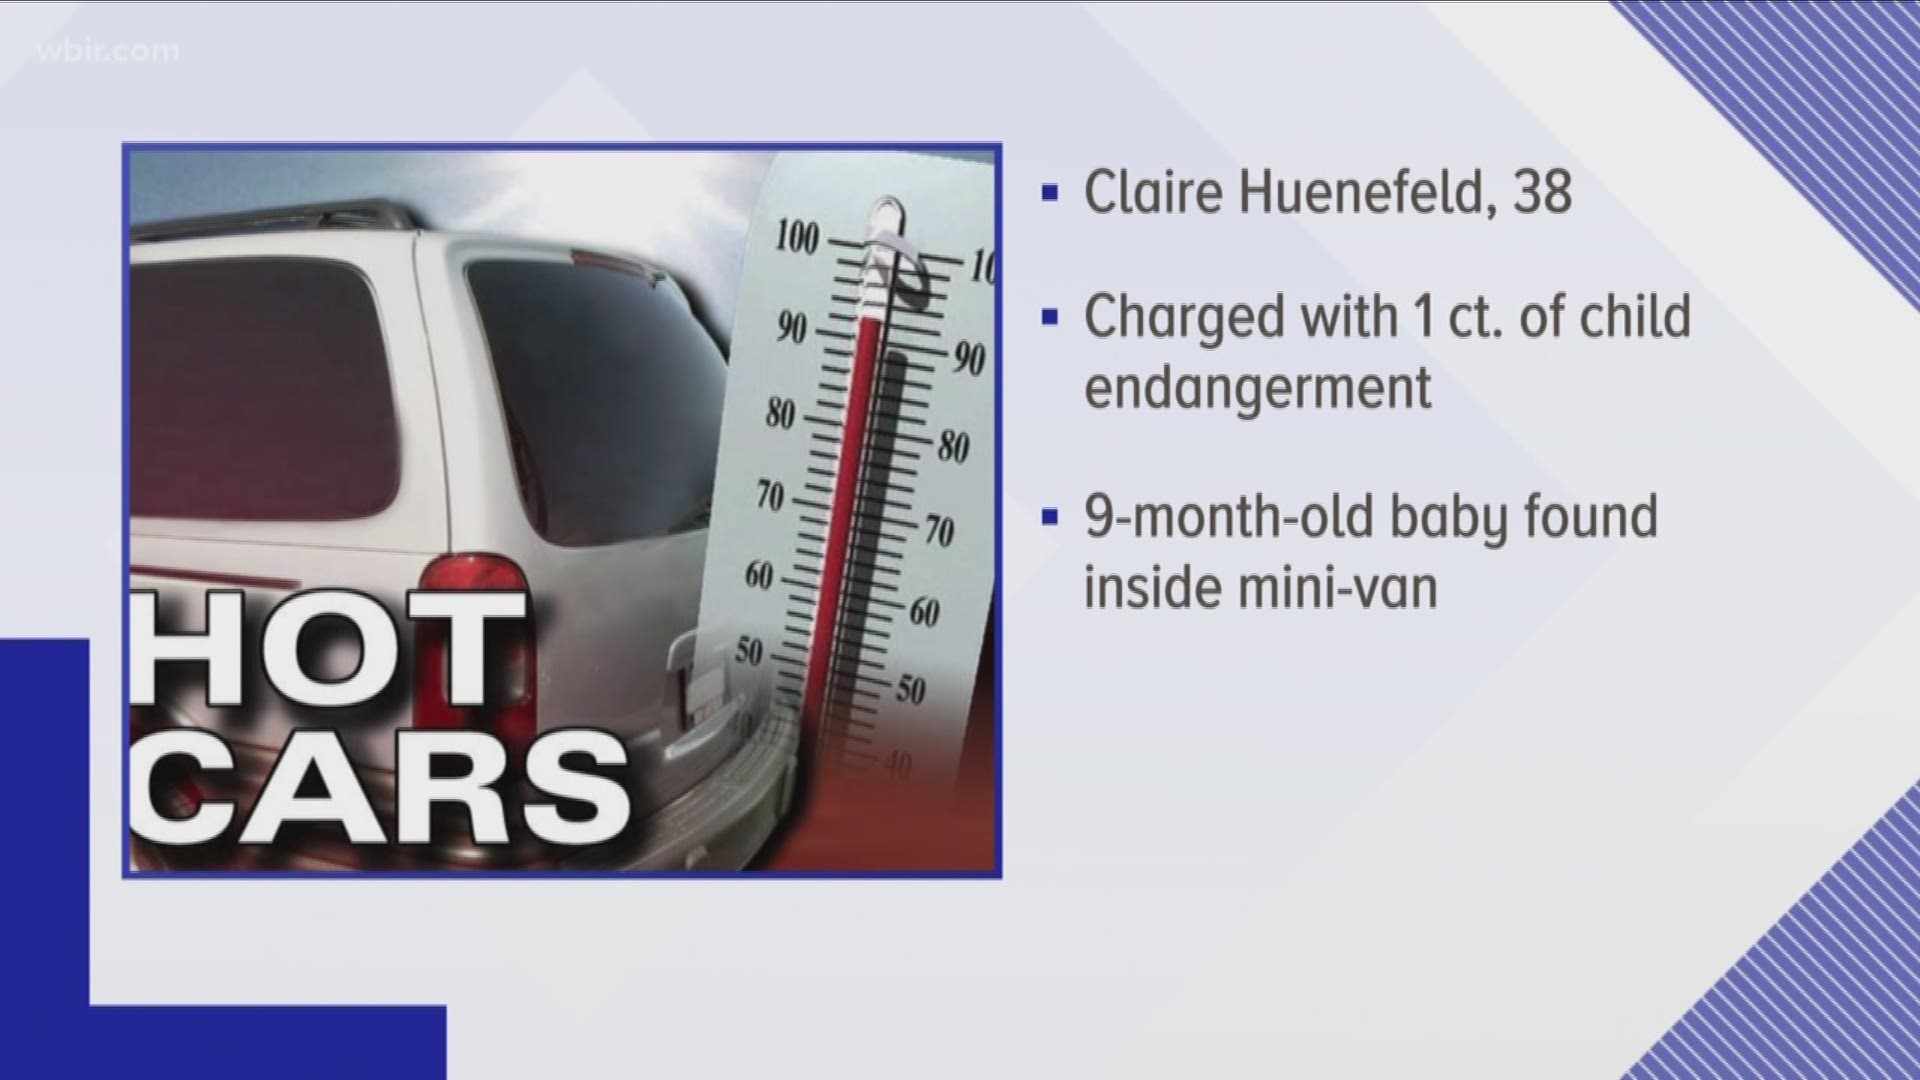 Knoxville police officers arrested and charged a foster parents that they say left a 9-month-old child in a hot car.